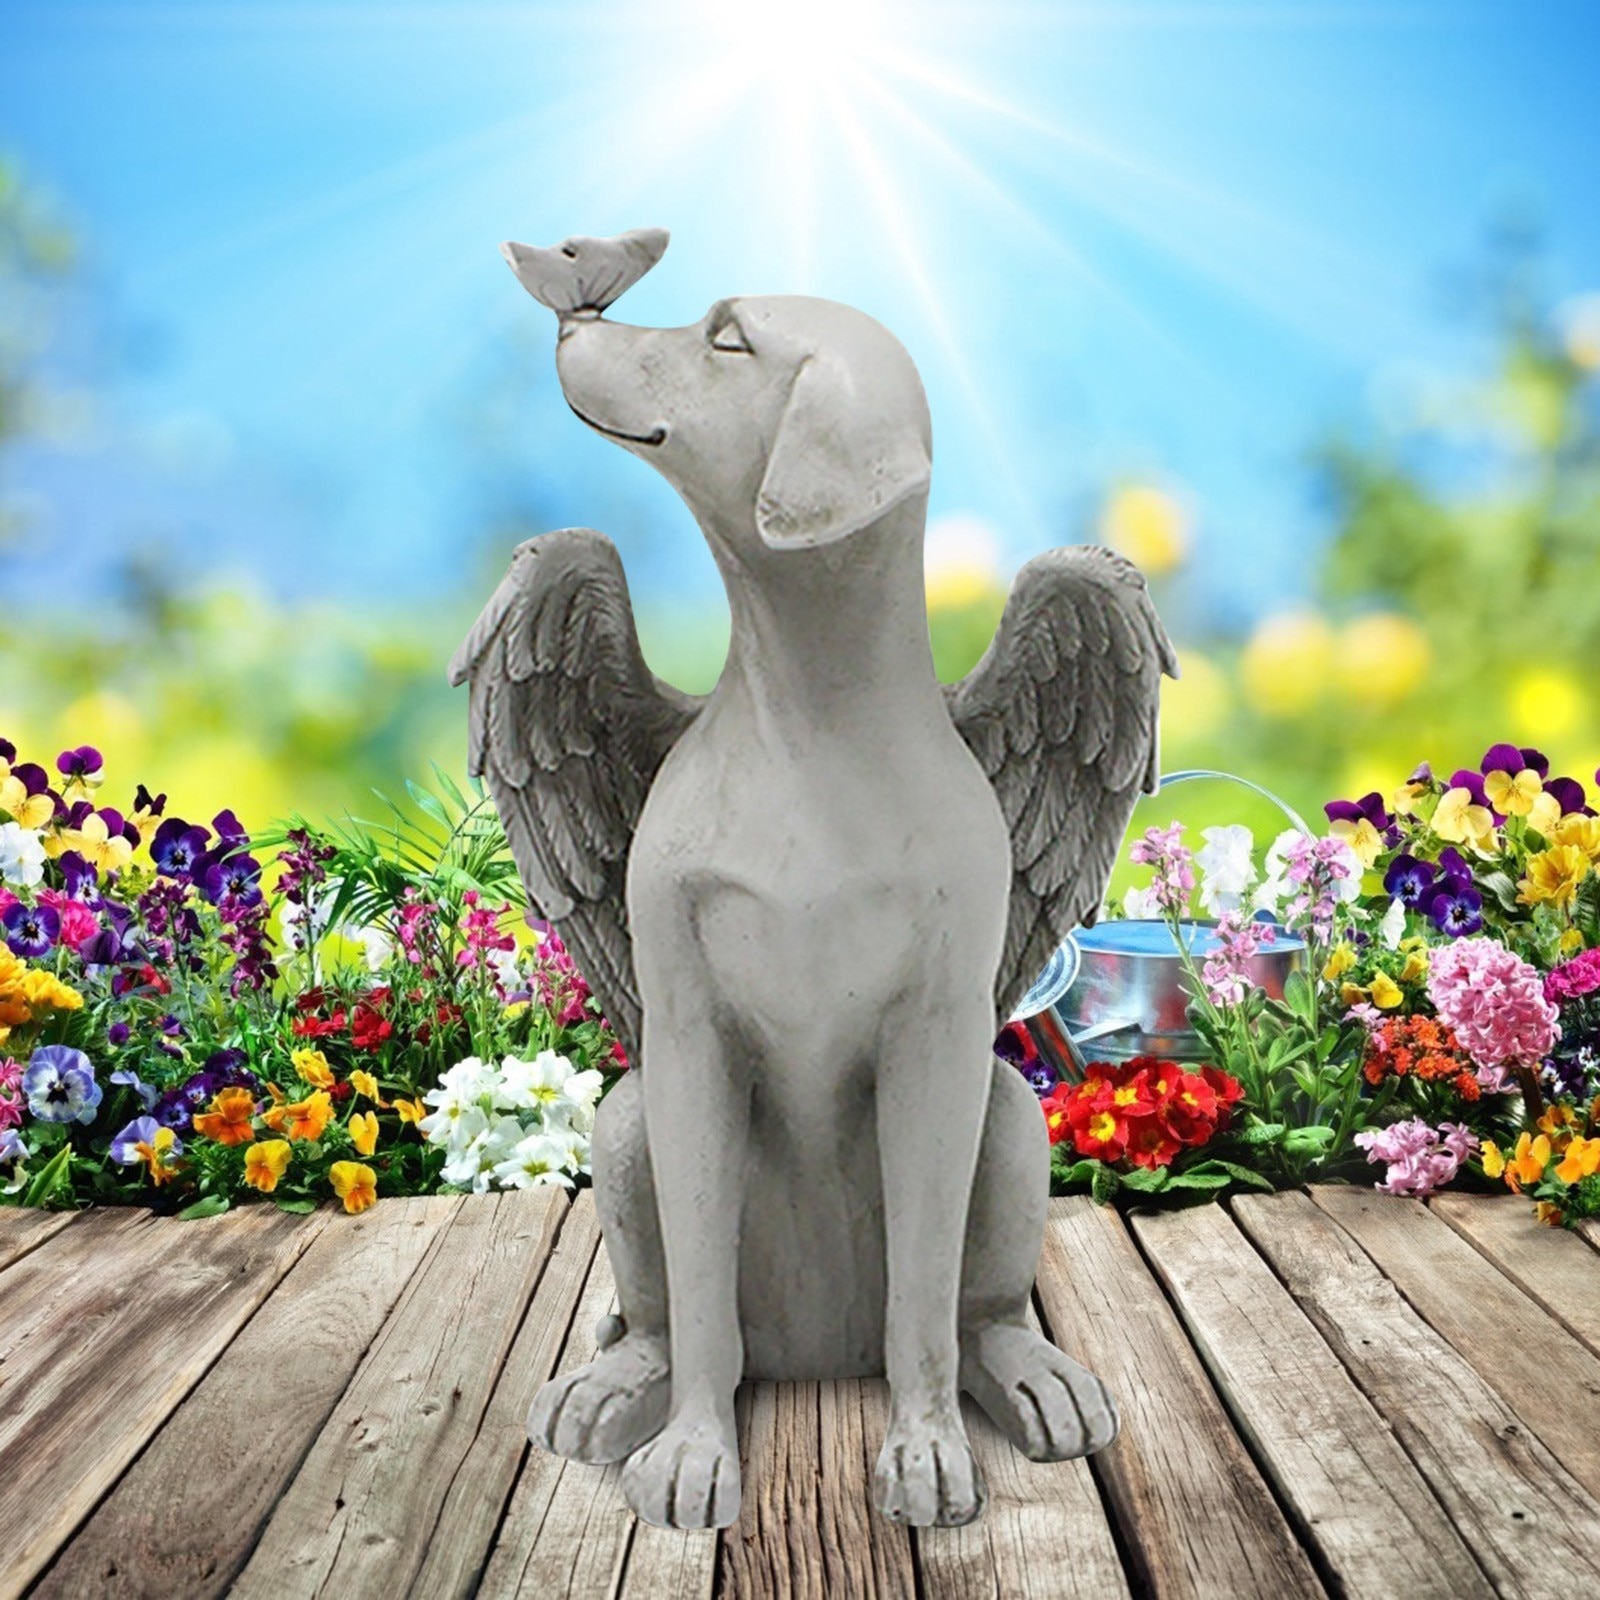 Chic Resin Dog Angel Statue Garden Lawn Flower Bush Ornament Dog Nose Perched Butterfly Sculpture